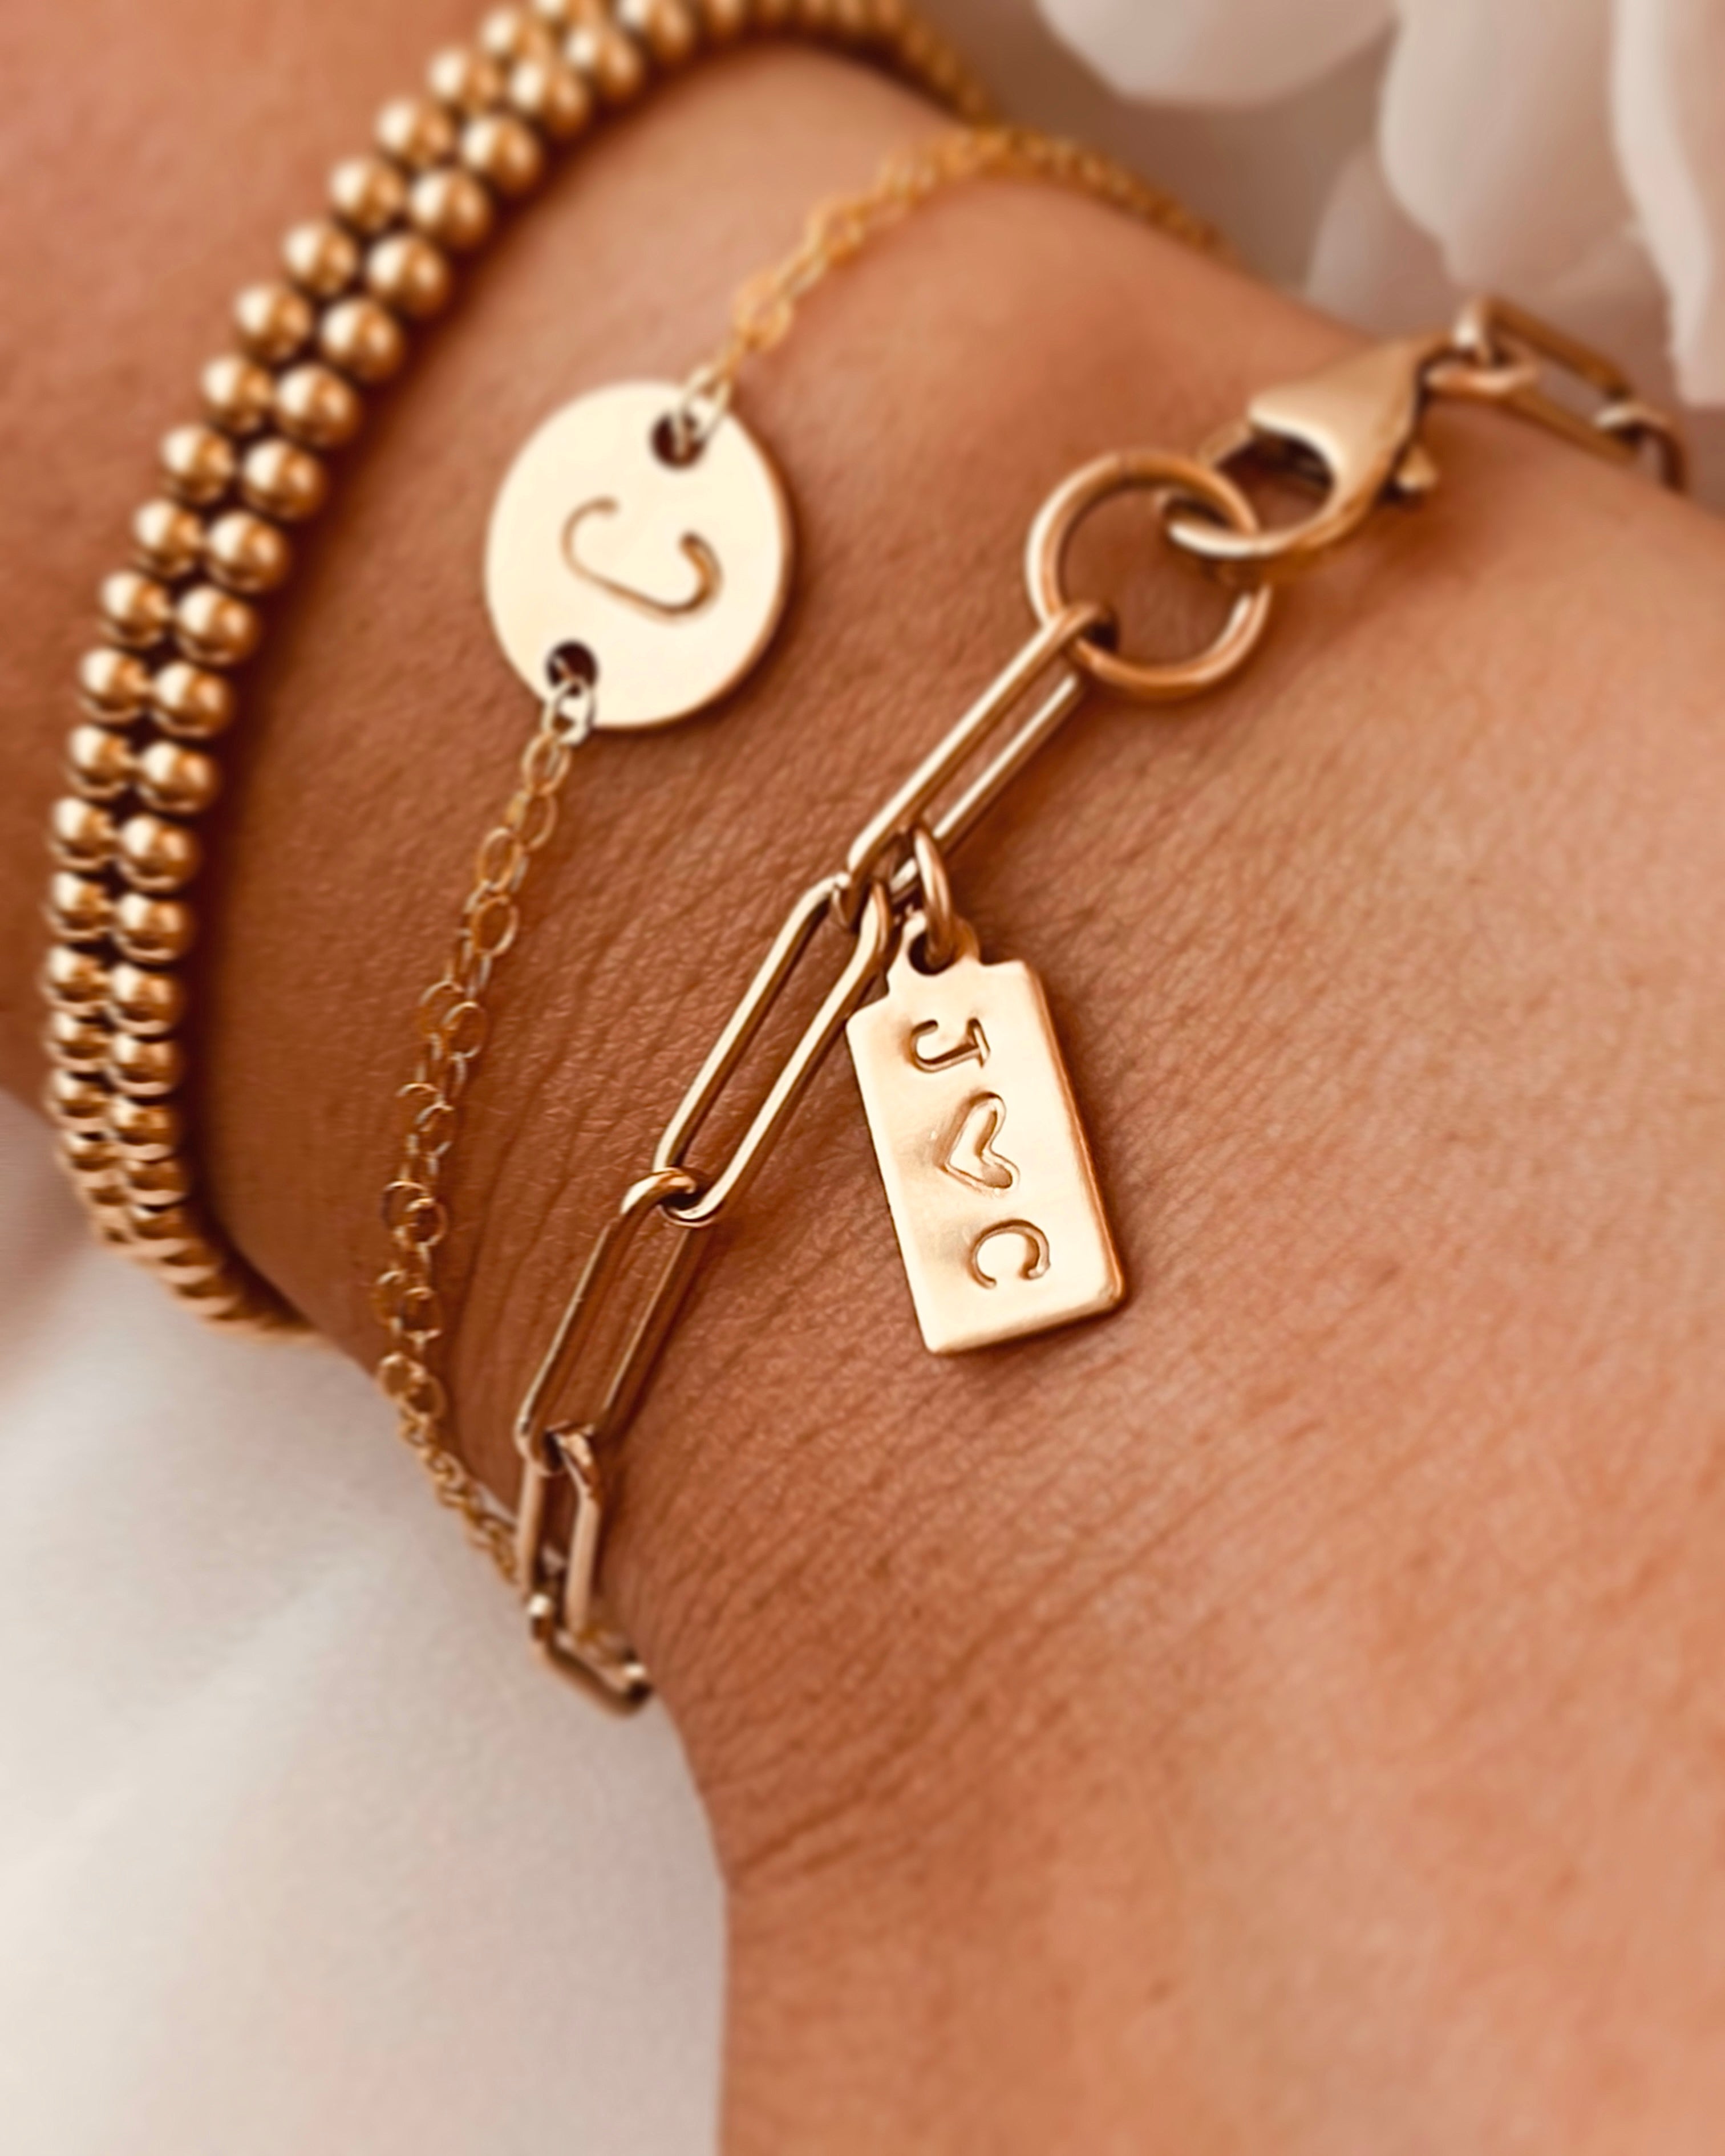 Custom Initial Bracelets For Couples and Friendships – By Isla Jewelry